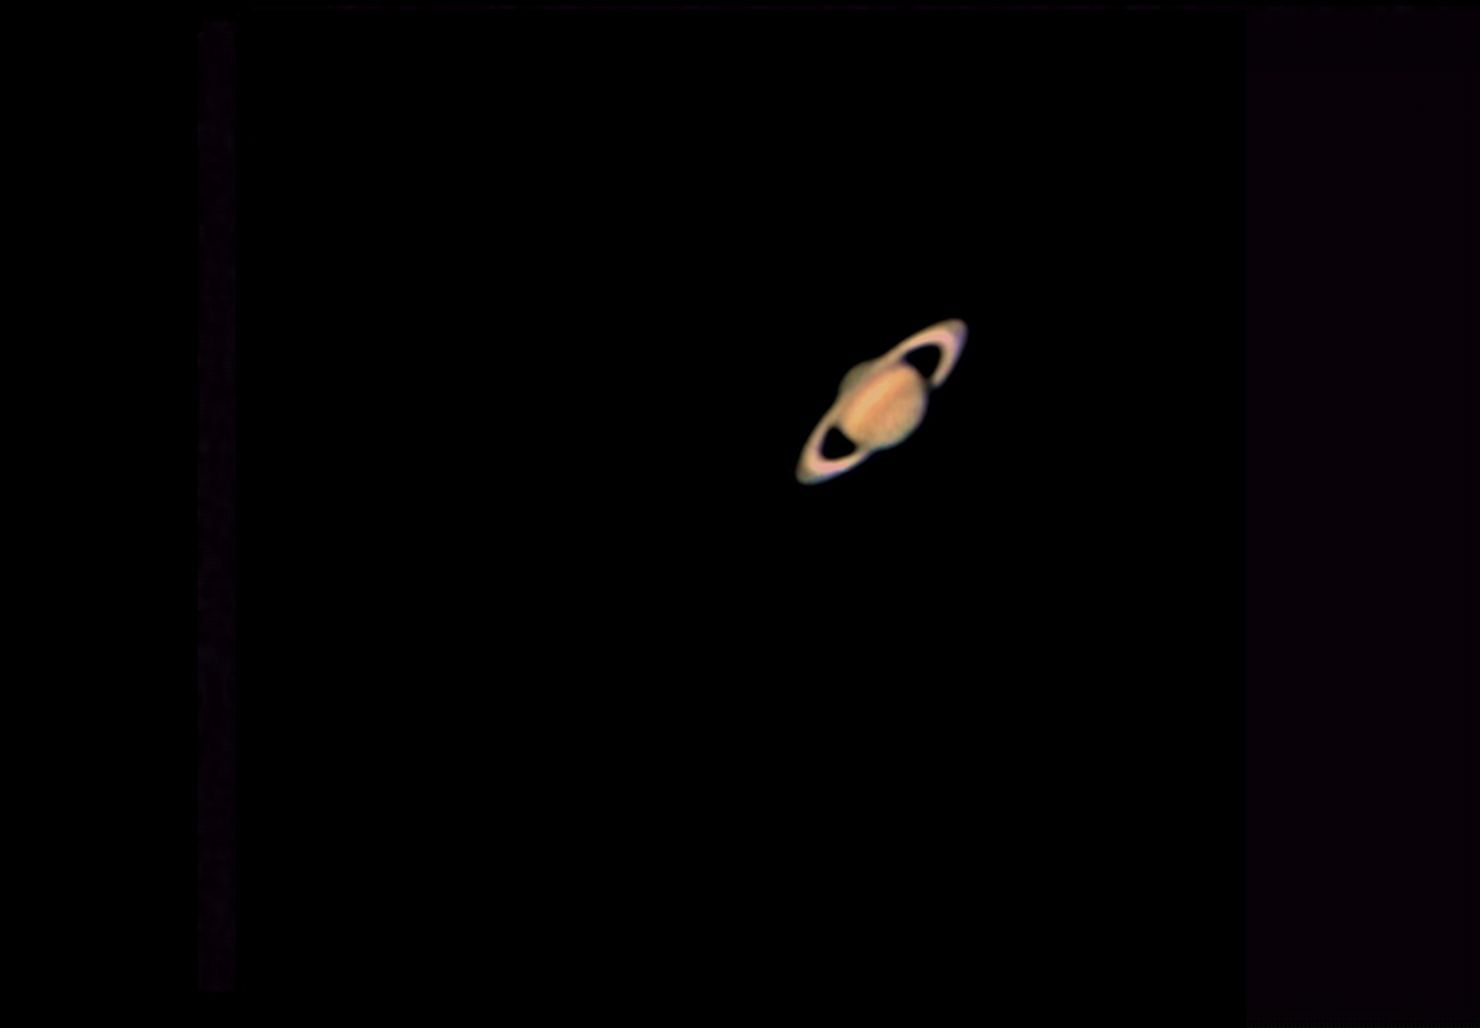 Saturn 6-19-13 at Orion Store